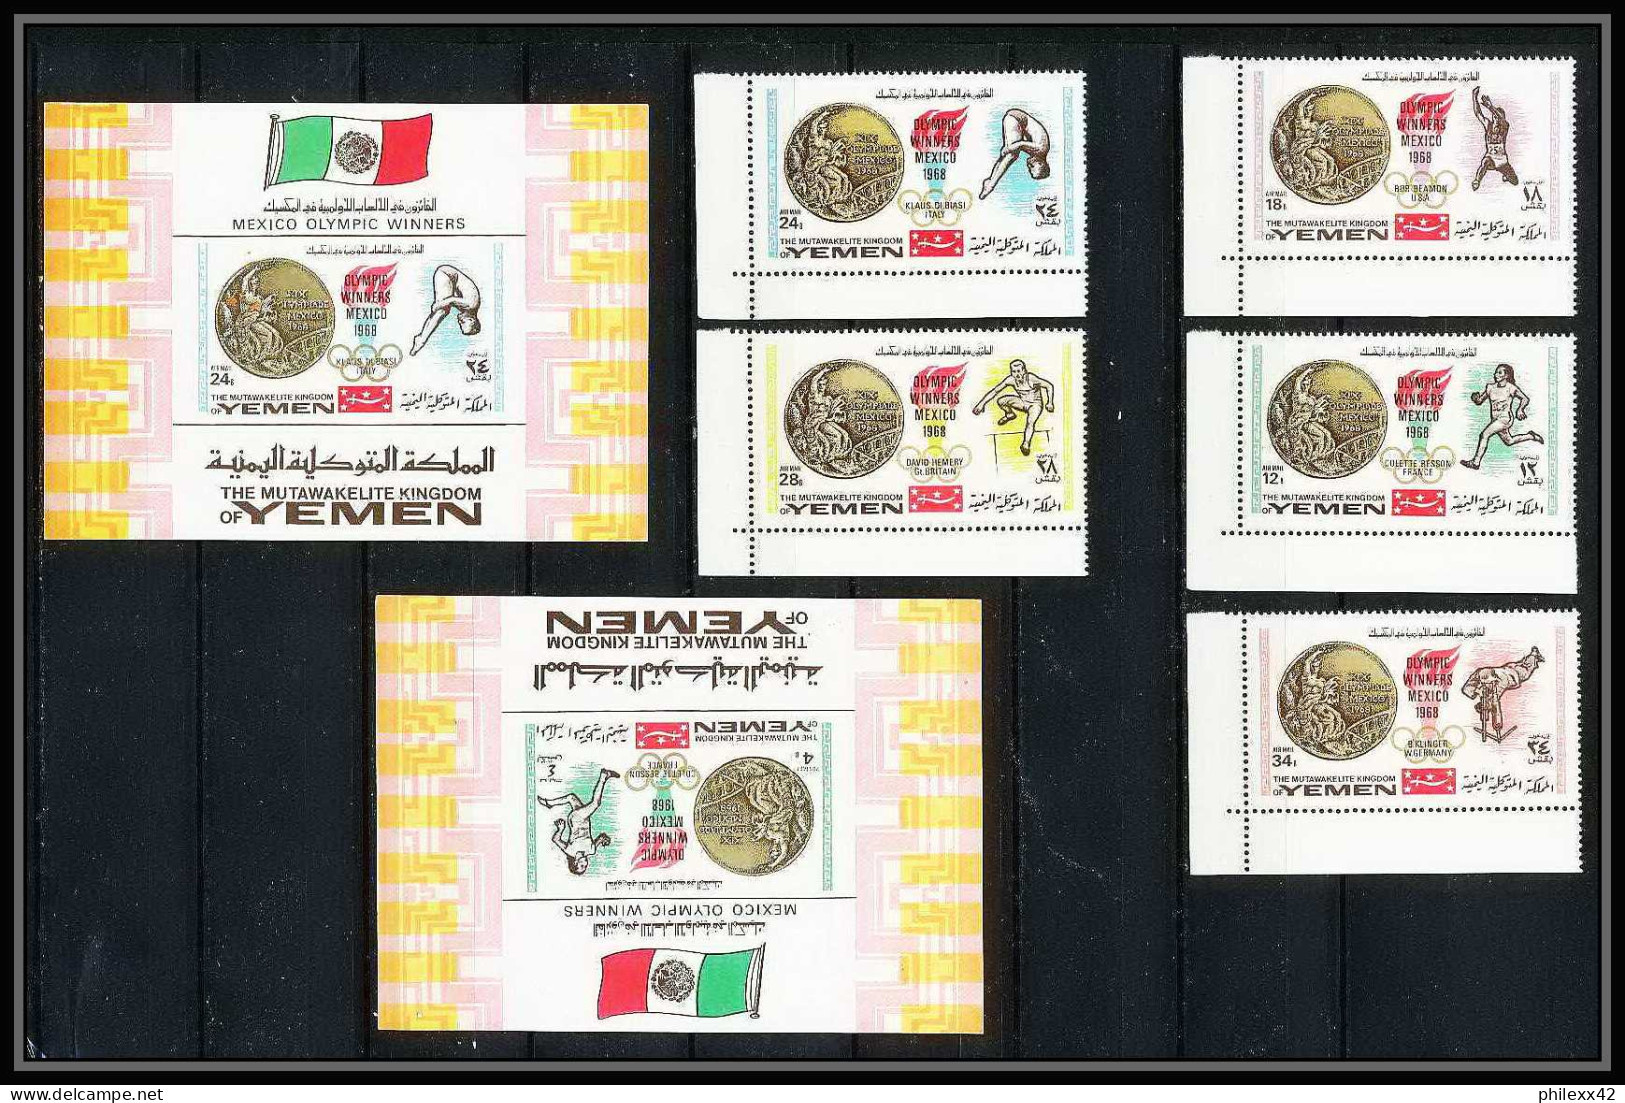 176b Yemen Kingdom MNH ** Mi N° 620 / 624 A + Blocs 141 / 142 A Jeux Olympiques (olympic Games) MEXICO 68 Gold Madalists - Sommer 1968: Mexico